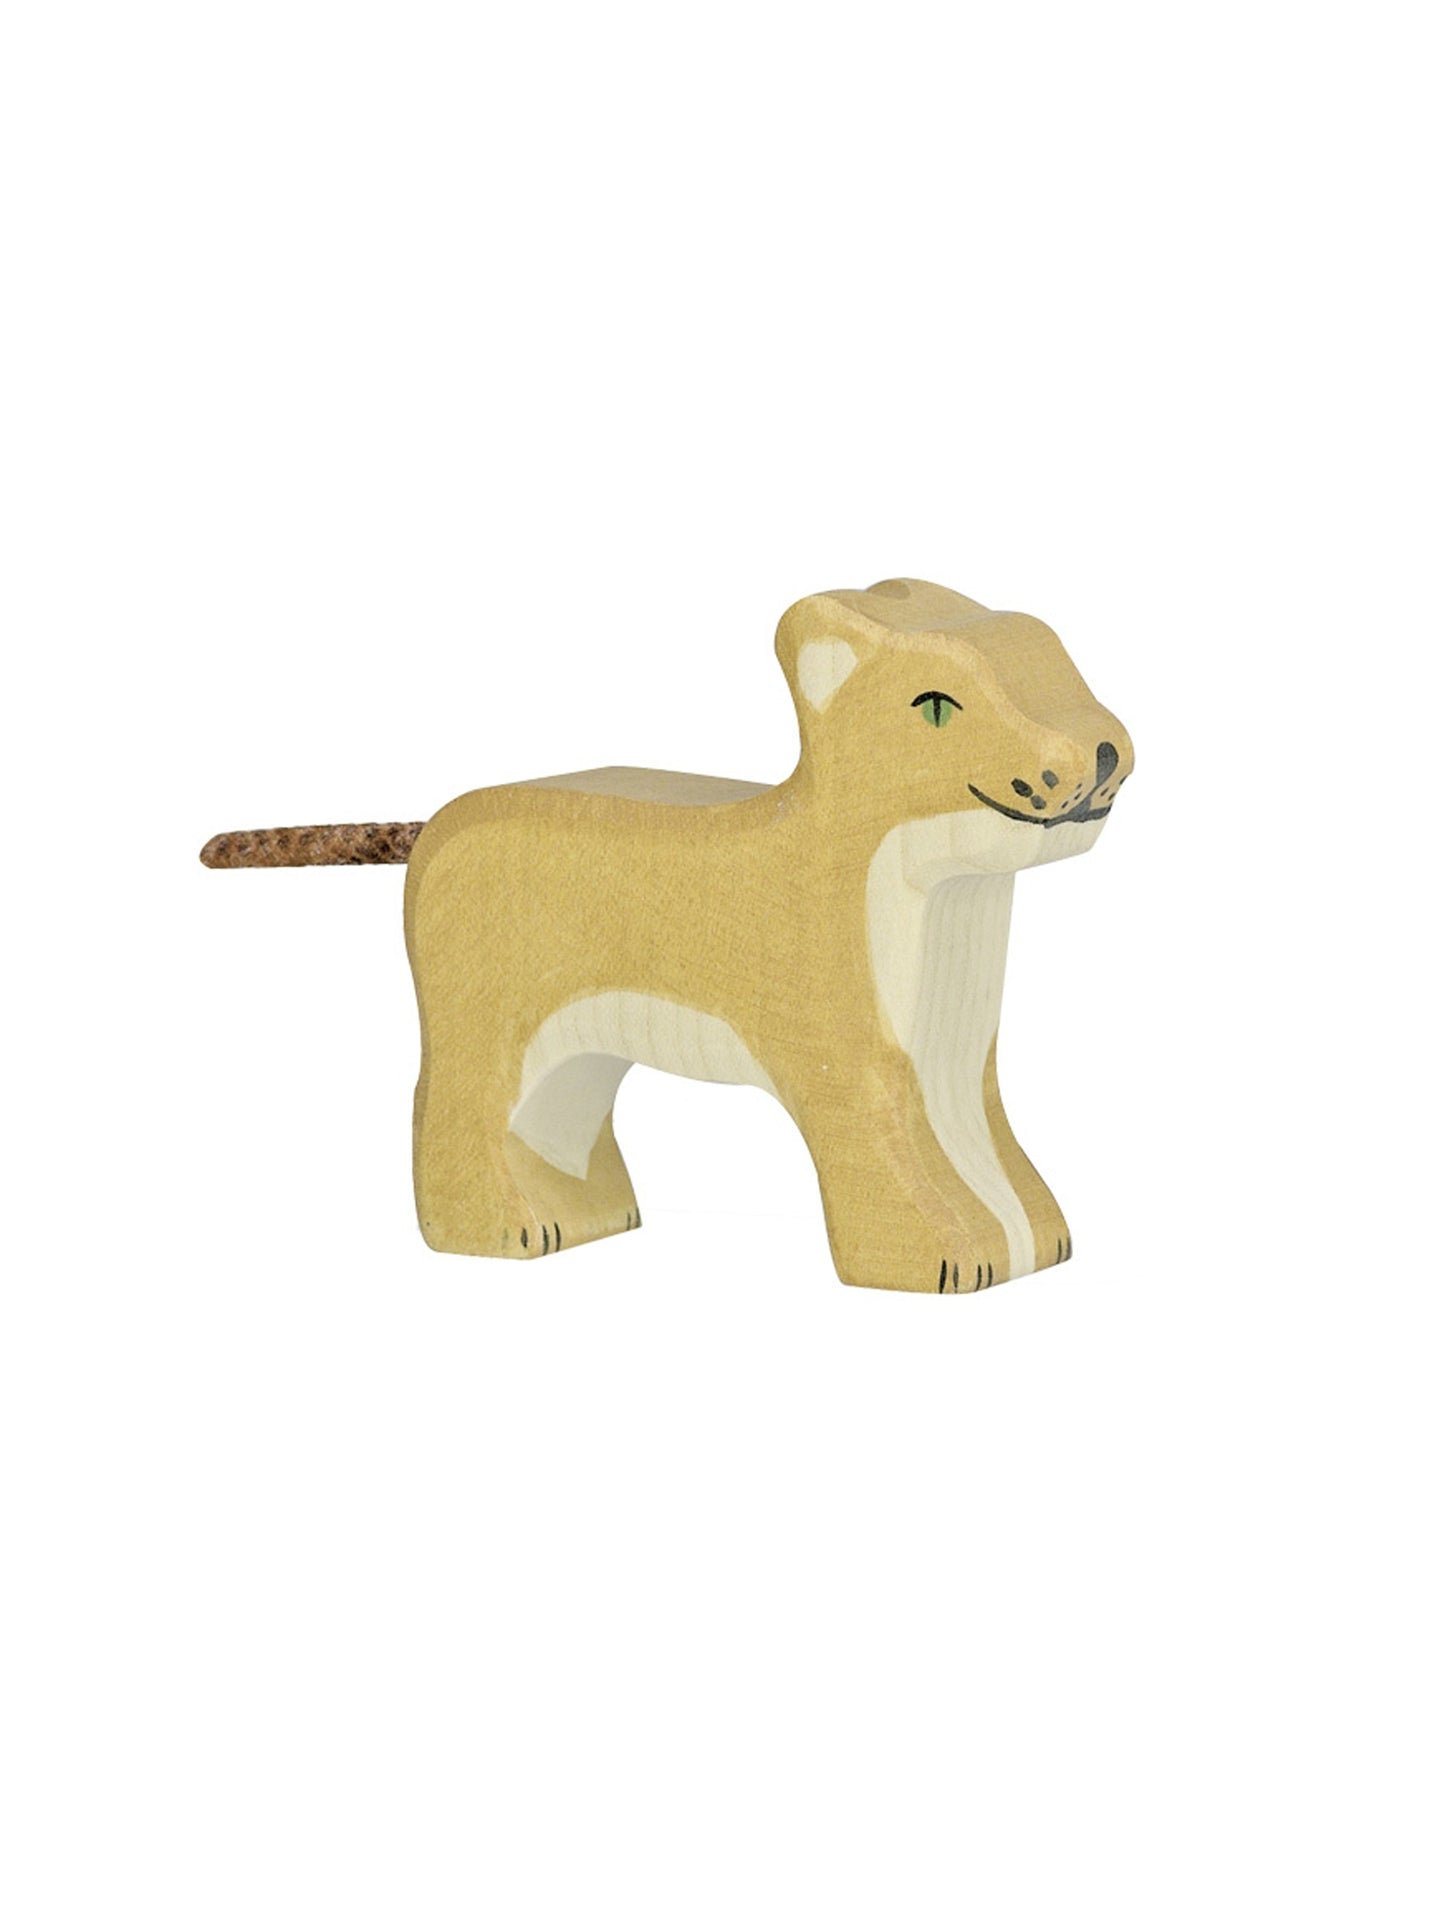 Holztiger Noah's Ark and Wooden Animals Lion Cub Standing Weston Table